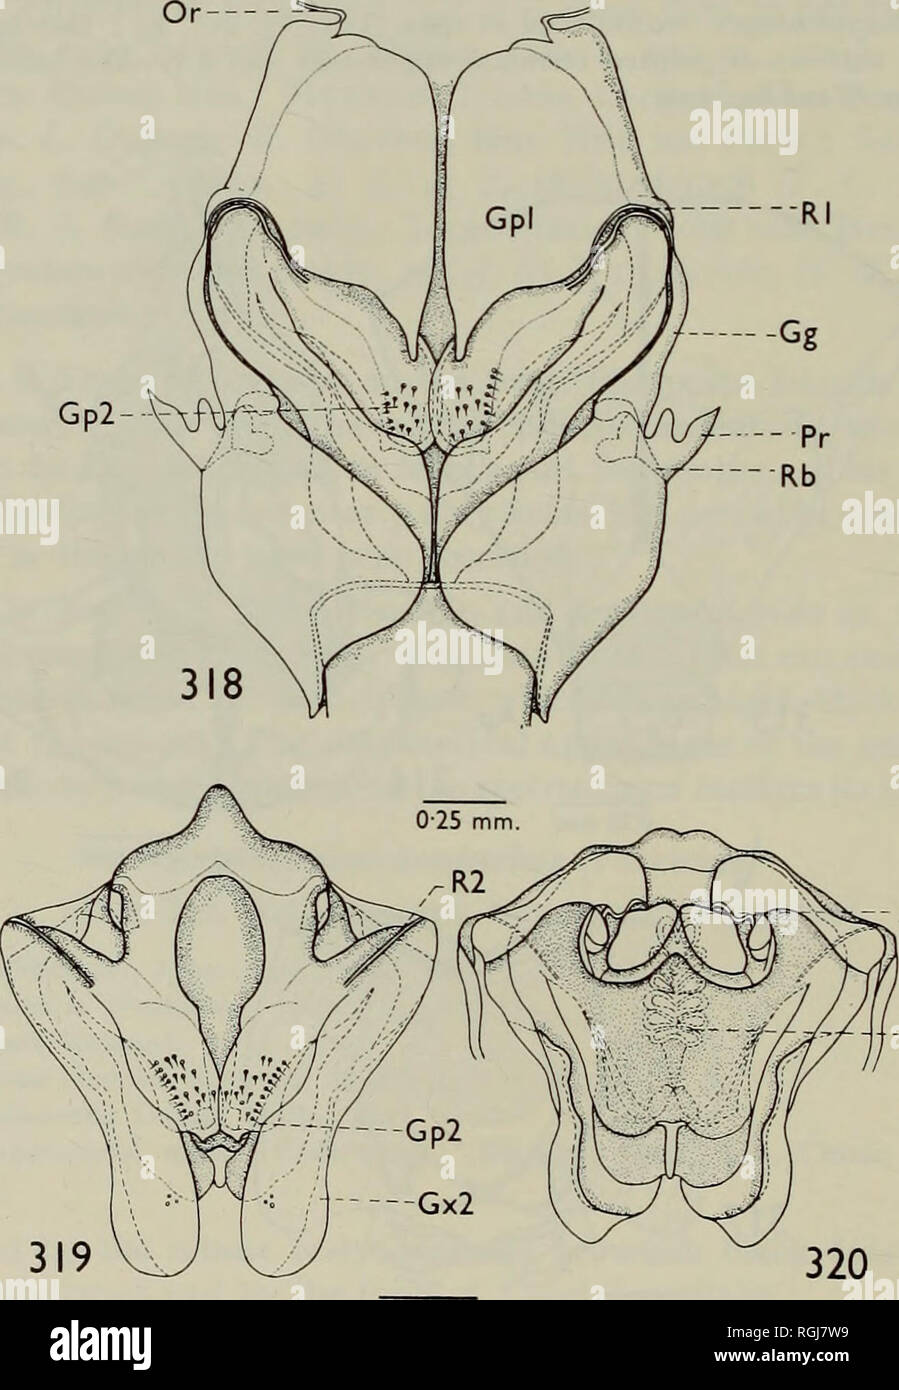 . Bulletin of the British Museum (Natural History) Entom Supp. 96 I. AHMAD ?. Very similar to $ in general appearance and measurements ; posterior margin of seventh abdominal sternum emarginate, very slightly convex in middle (Text-fig. 315). $ genitalia : First gonocoxae elongated, about three times as long as broad, apices pointed (Text-fig. 239) ; six pairs of intervalvular sacs (Text-fig. 320) ; spermatheca thick in middle with a median flange, round and coiled tube (Text-fig. 225). Type material. Holotype &lt;$ of Gerris oratorius Fabricius, Sumatra : (Daldorff), with label &quot; Mus. de Stock Photo